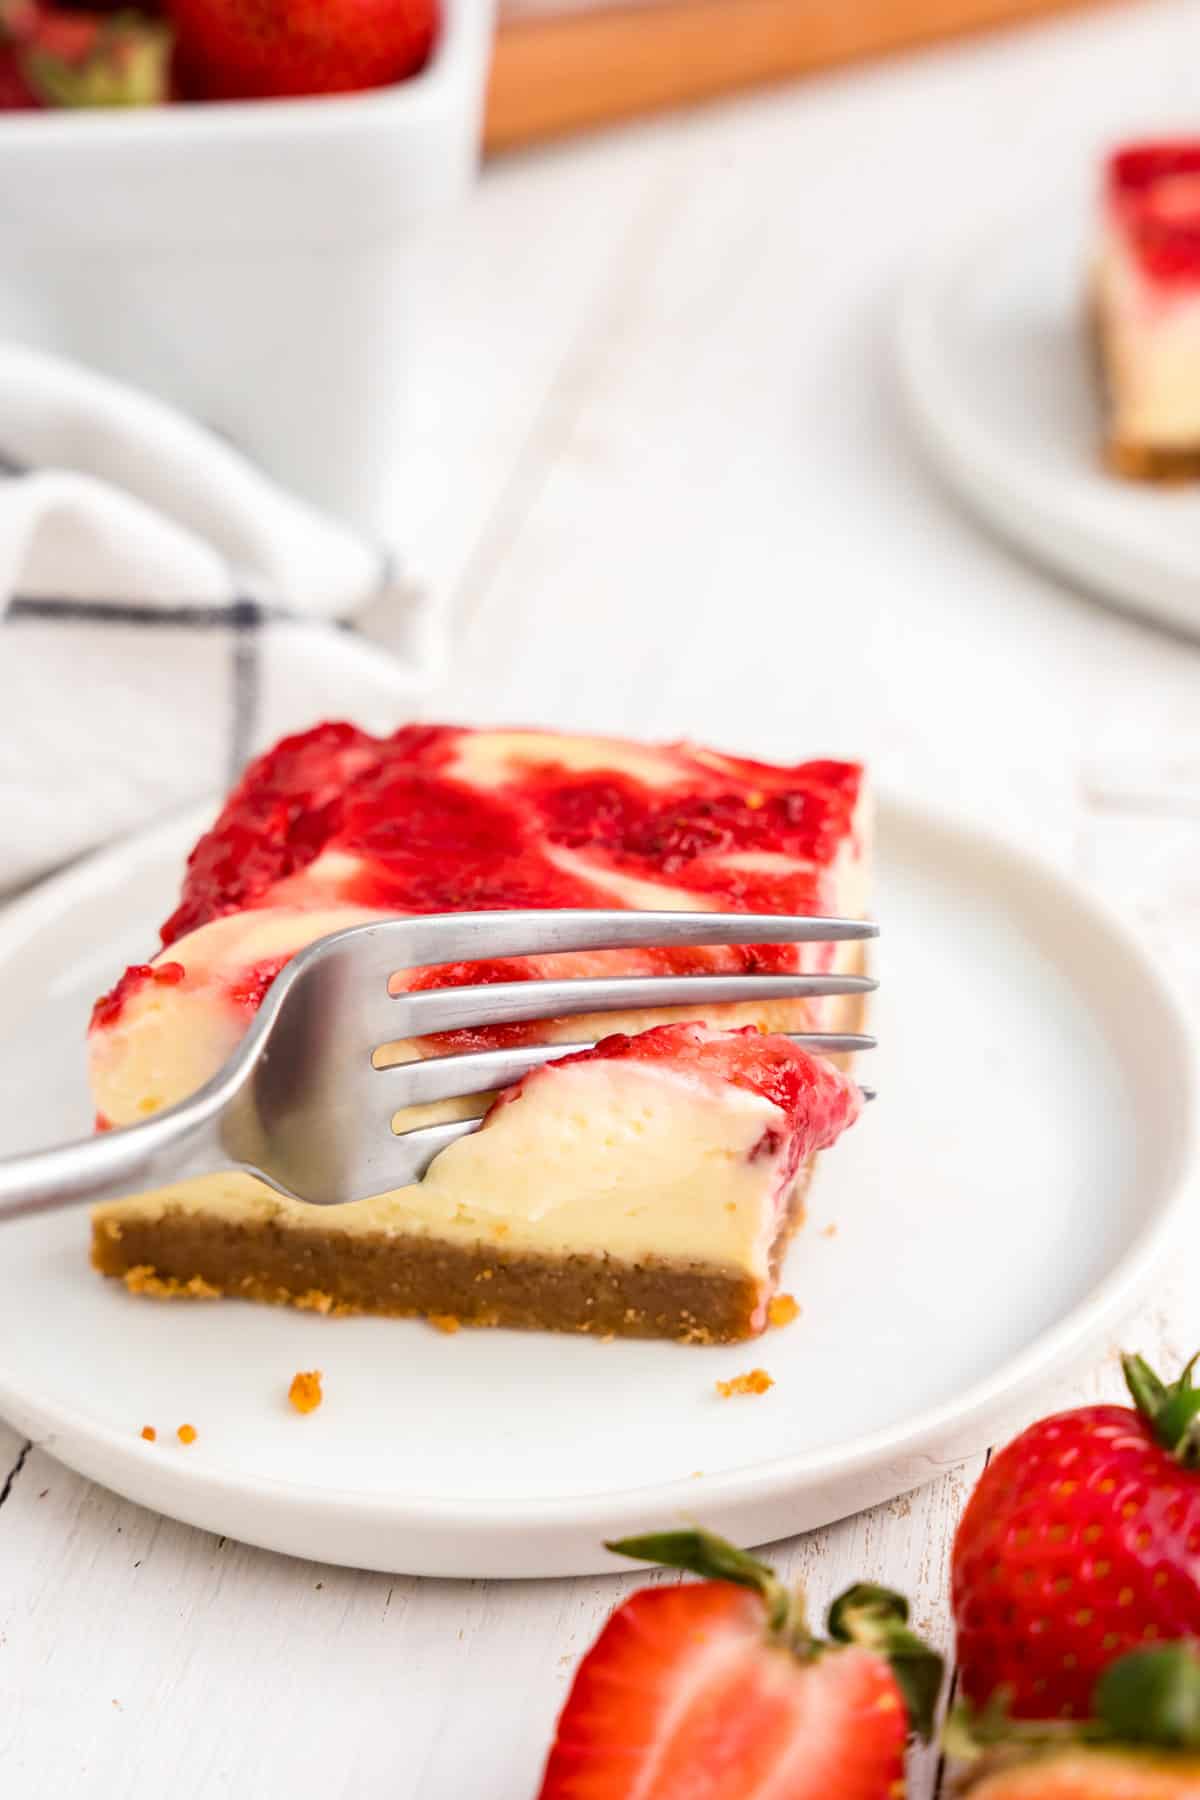 Strawberry Cheesecake Bars cut into square on plate and using a fork to take the first bite